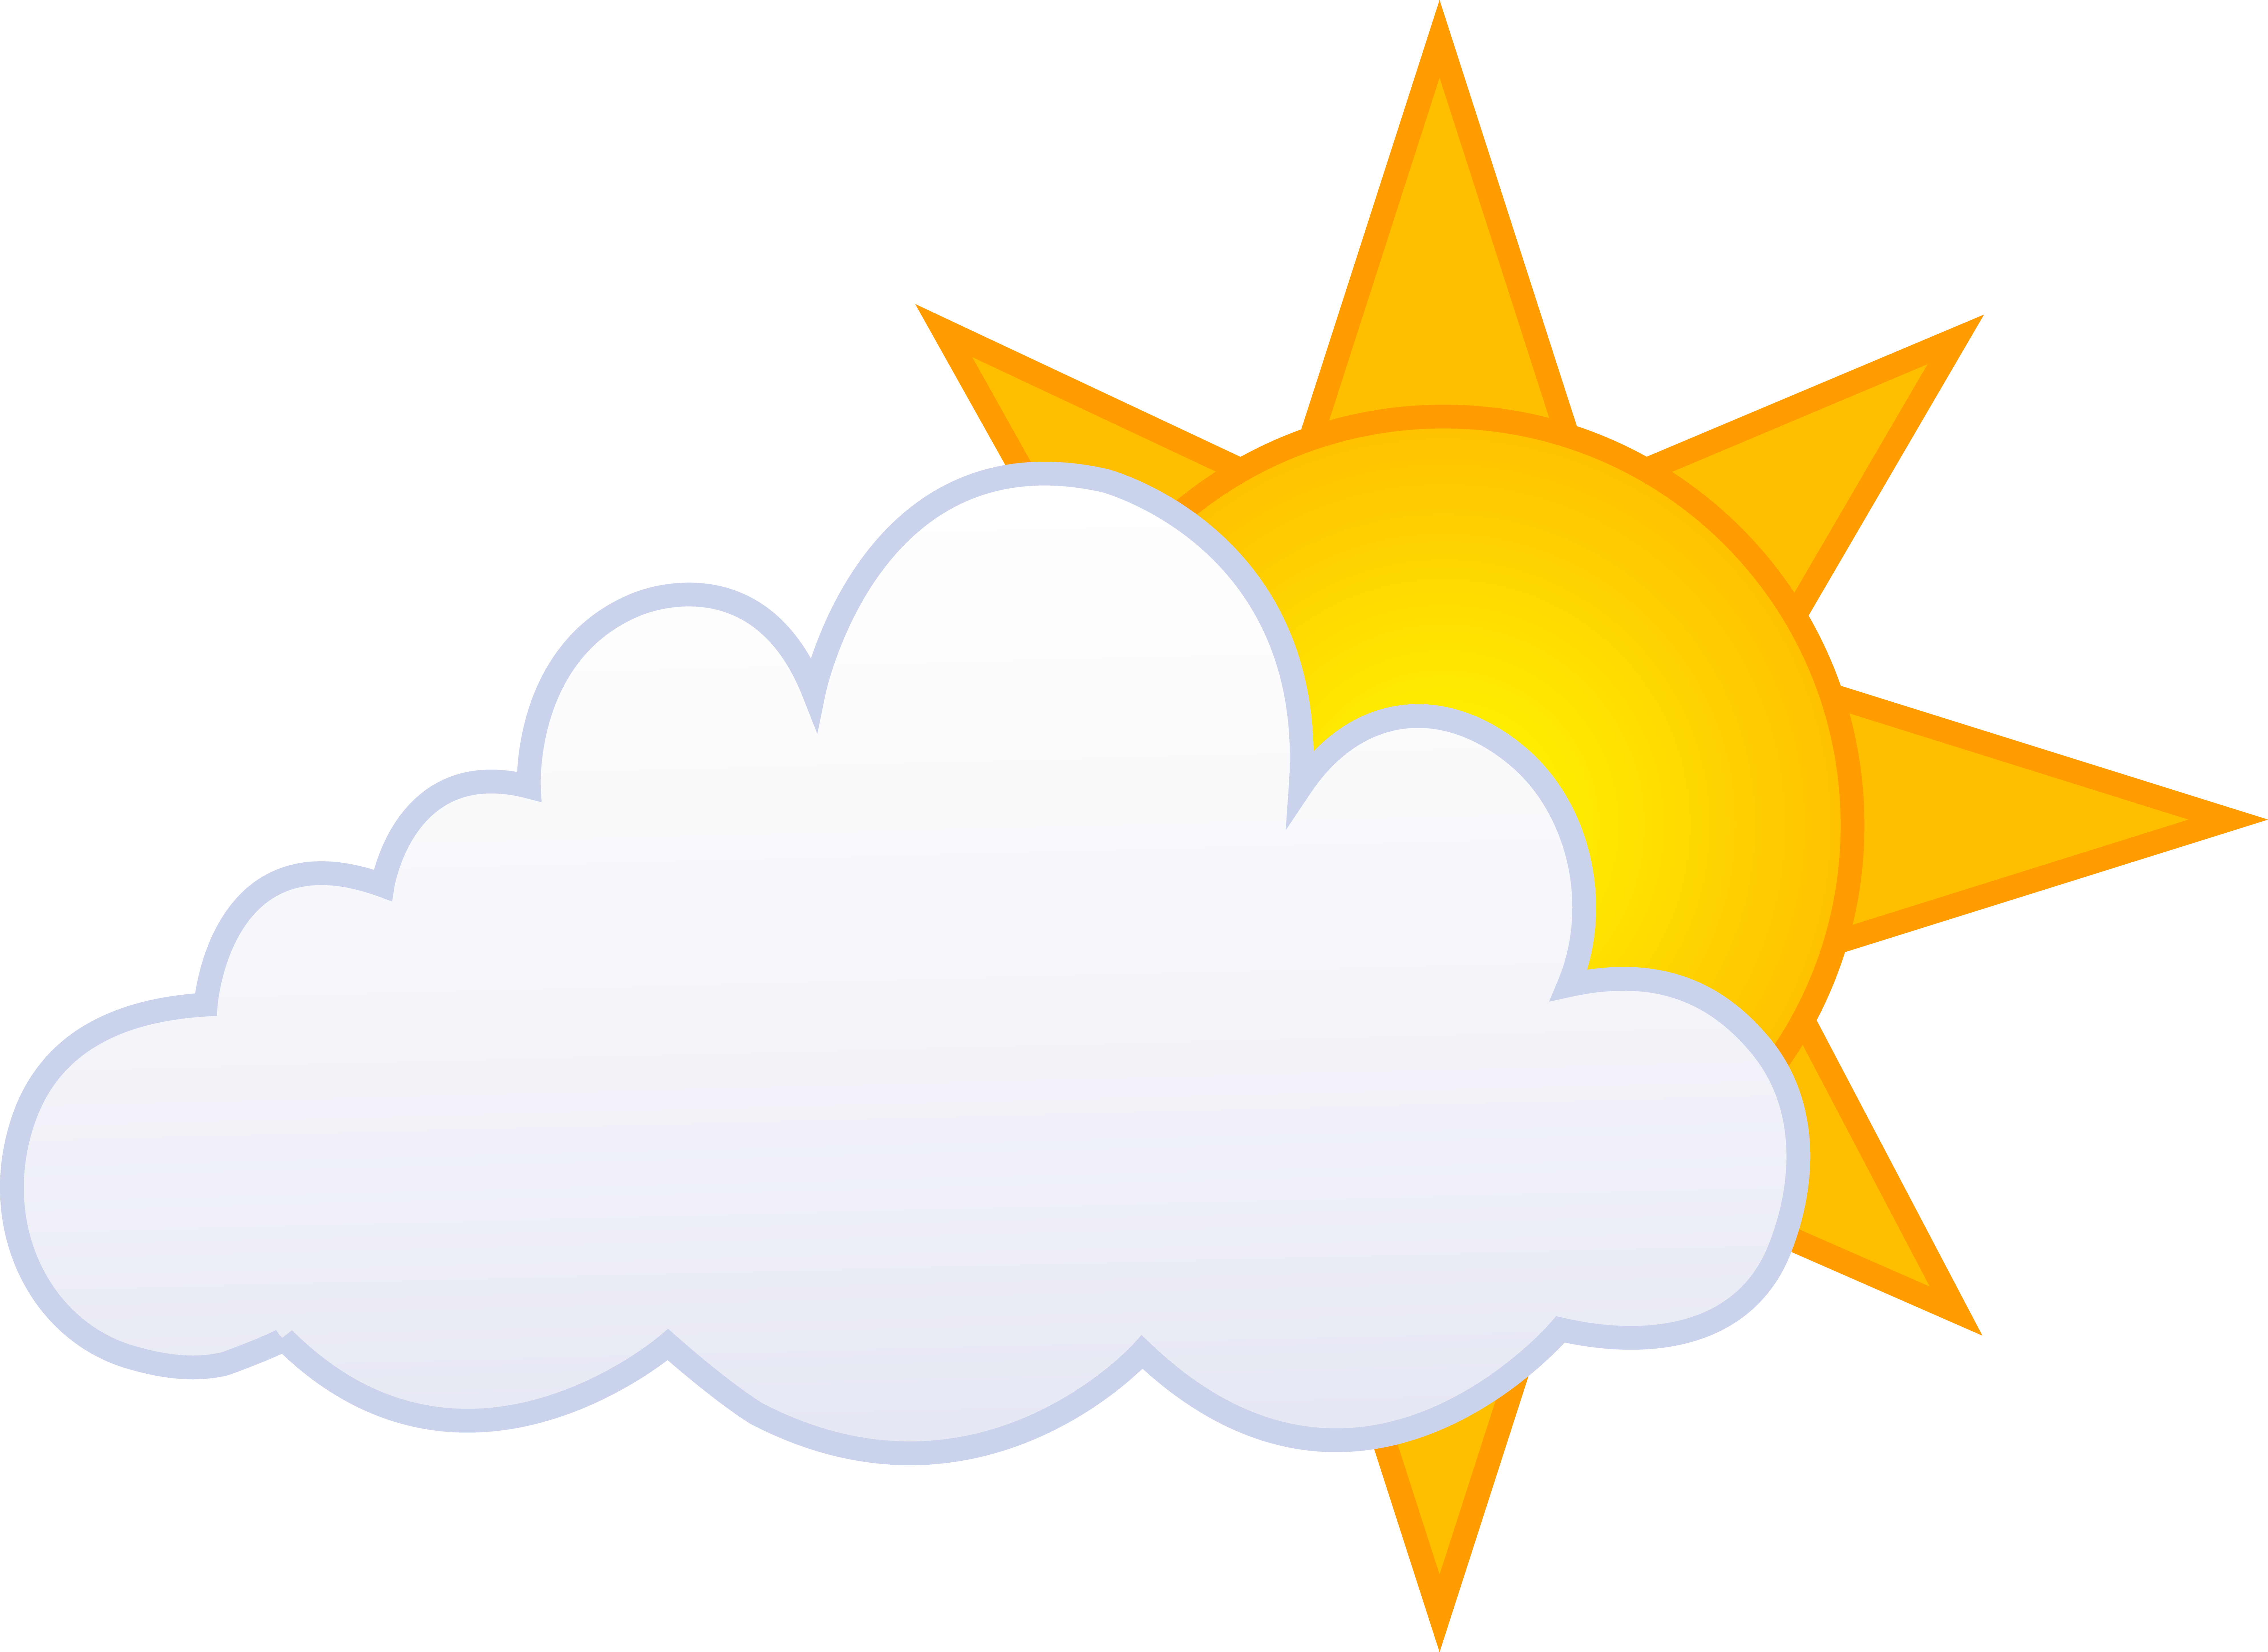 Mostly Cloudy Clipart - ClipArt Best